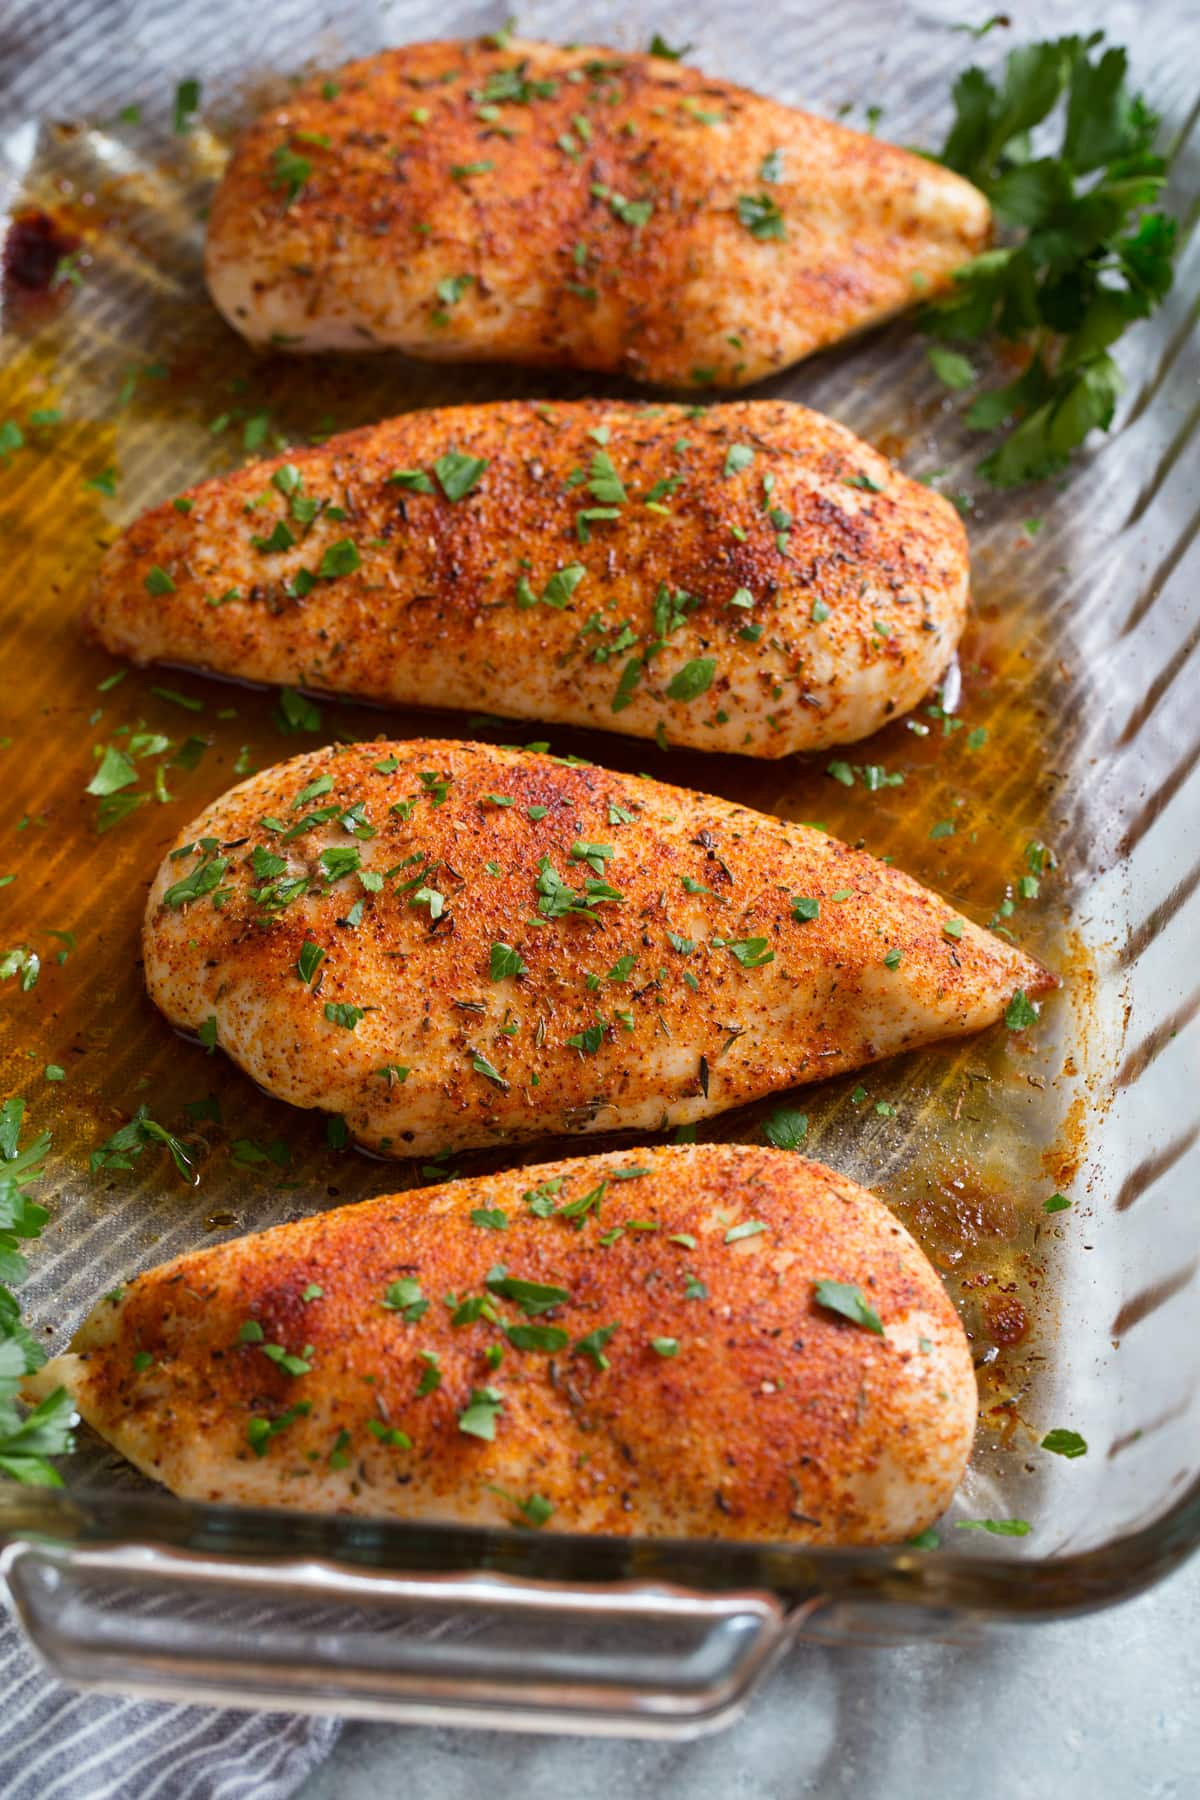 Baking Chicken Breasts In the Oven Inspirational Baked Chicken Breast Easy Flavorful Recipe Cooking Classy